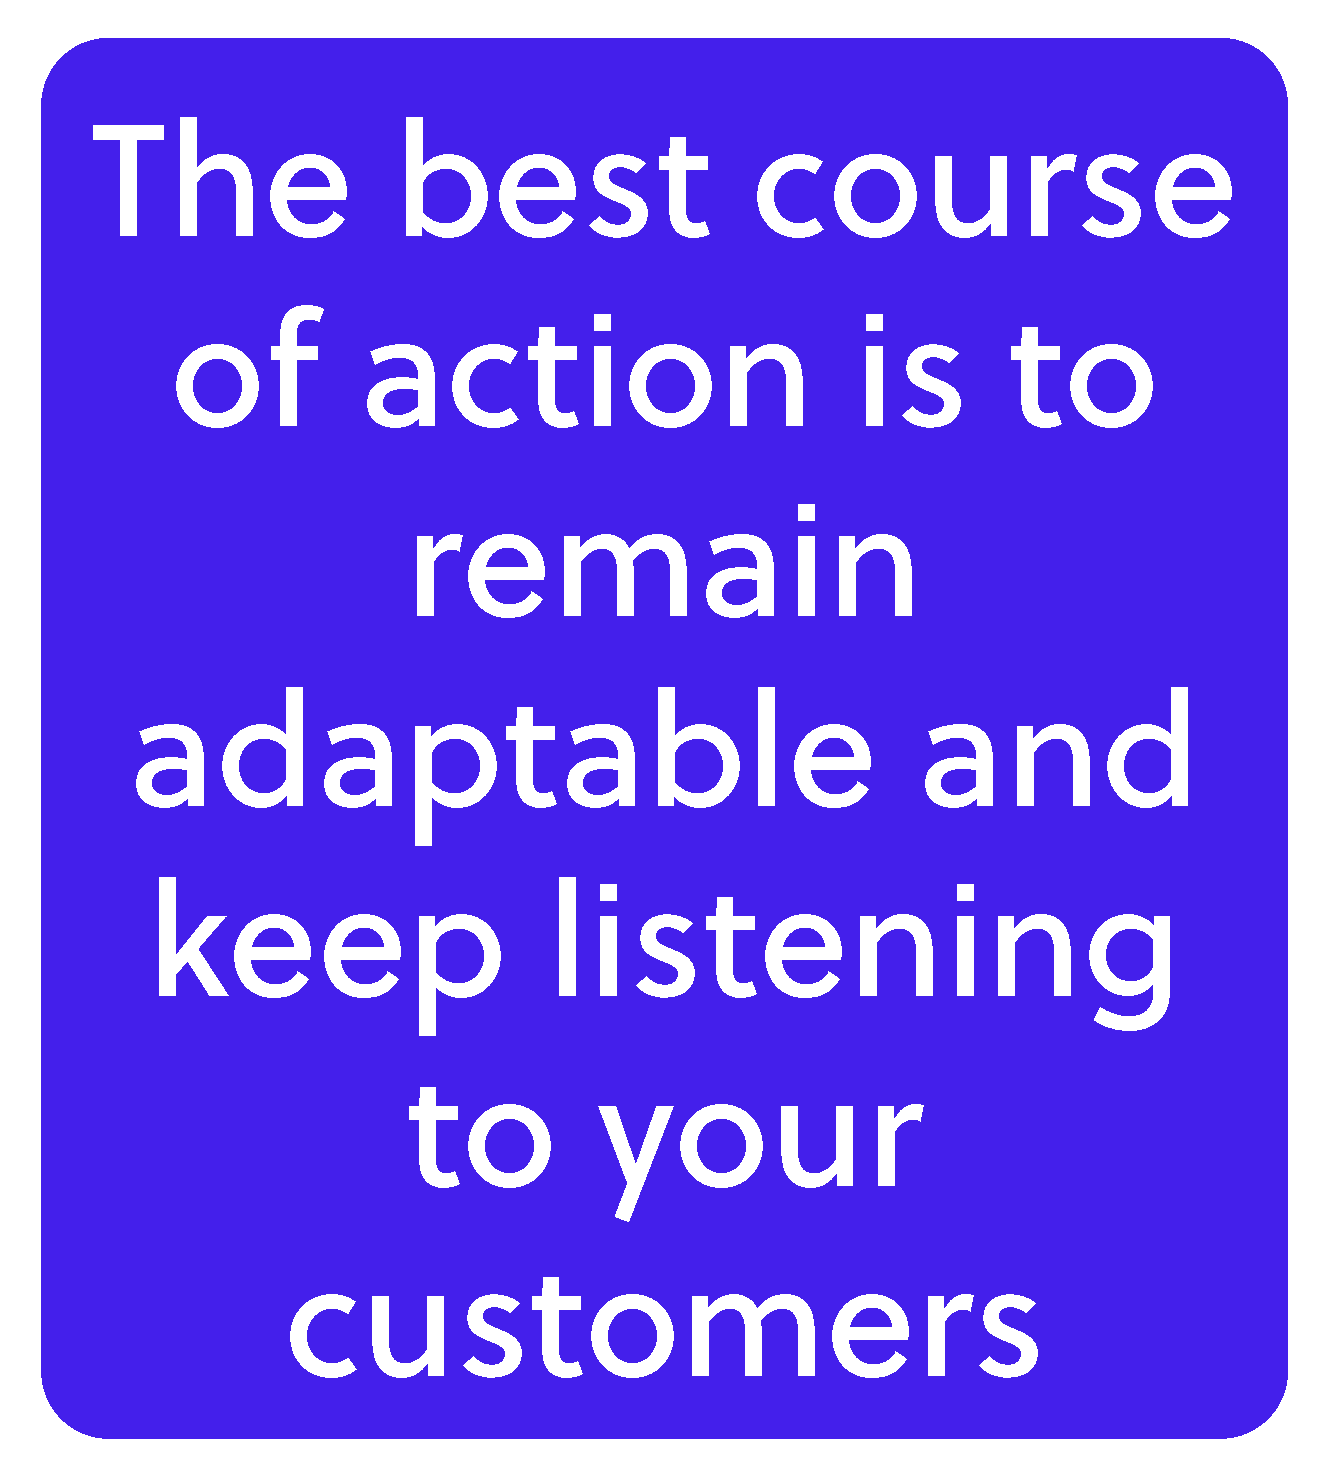 listen to customers and adapt